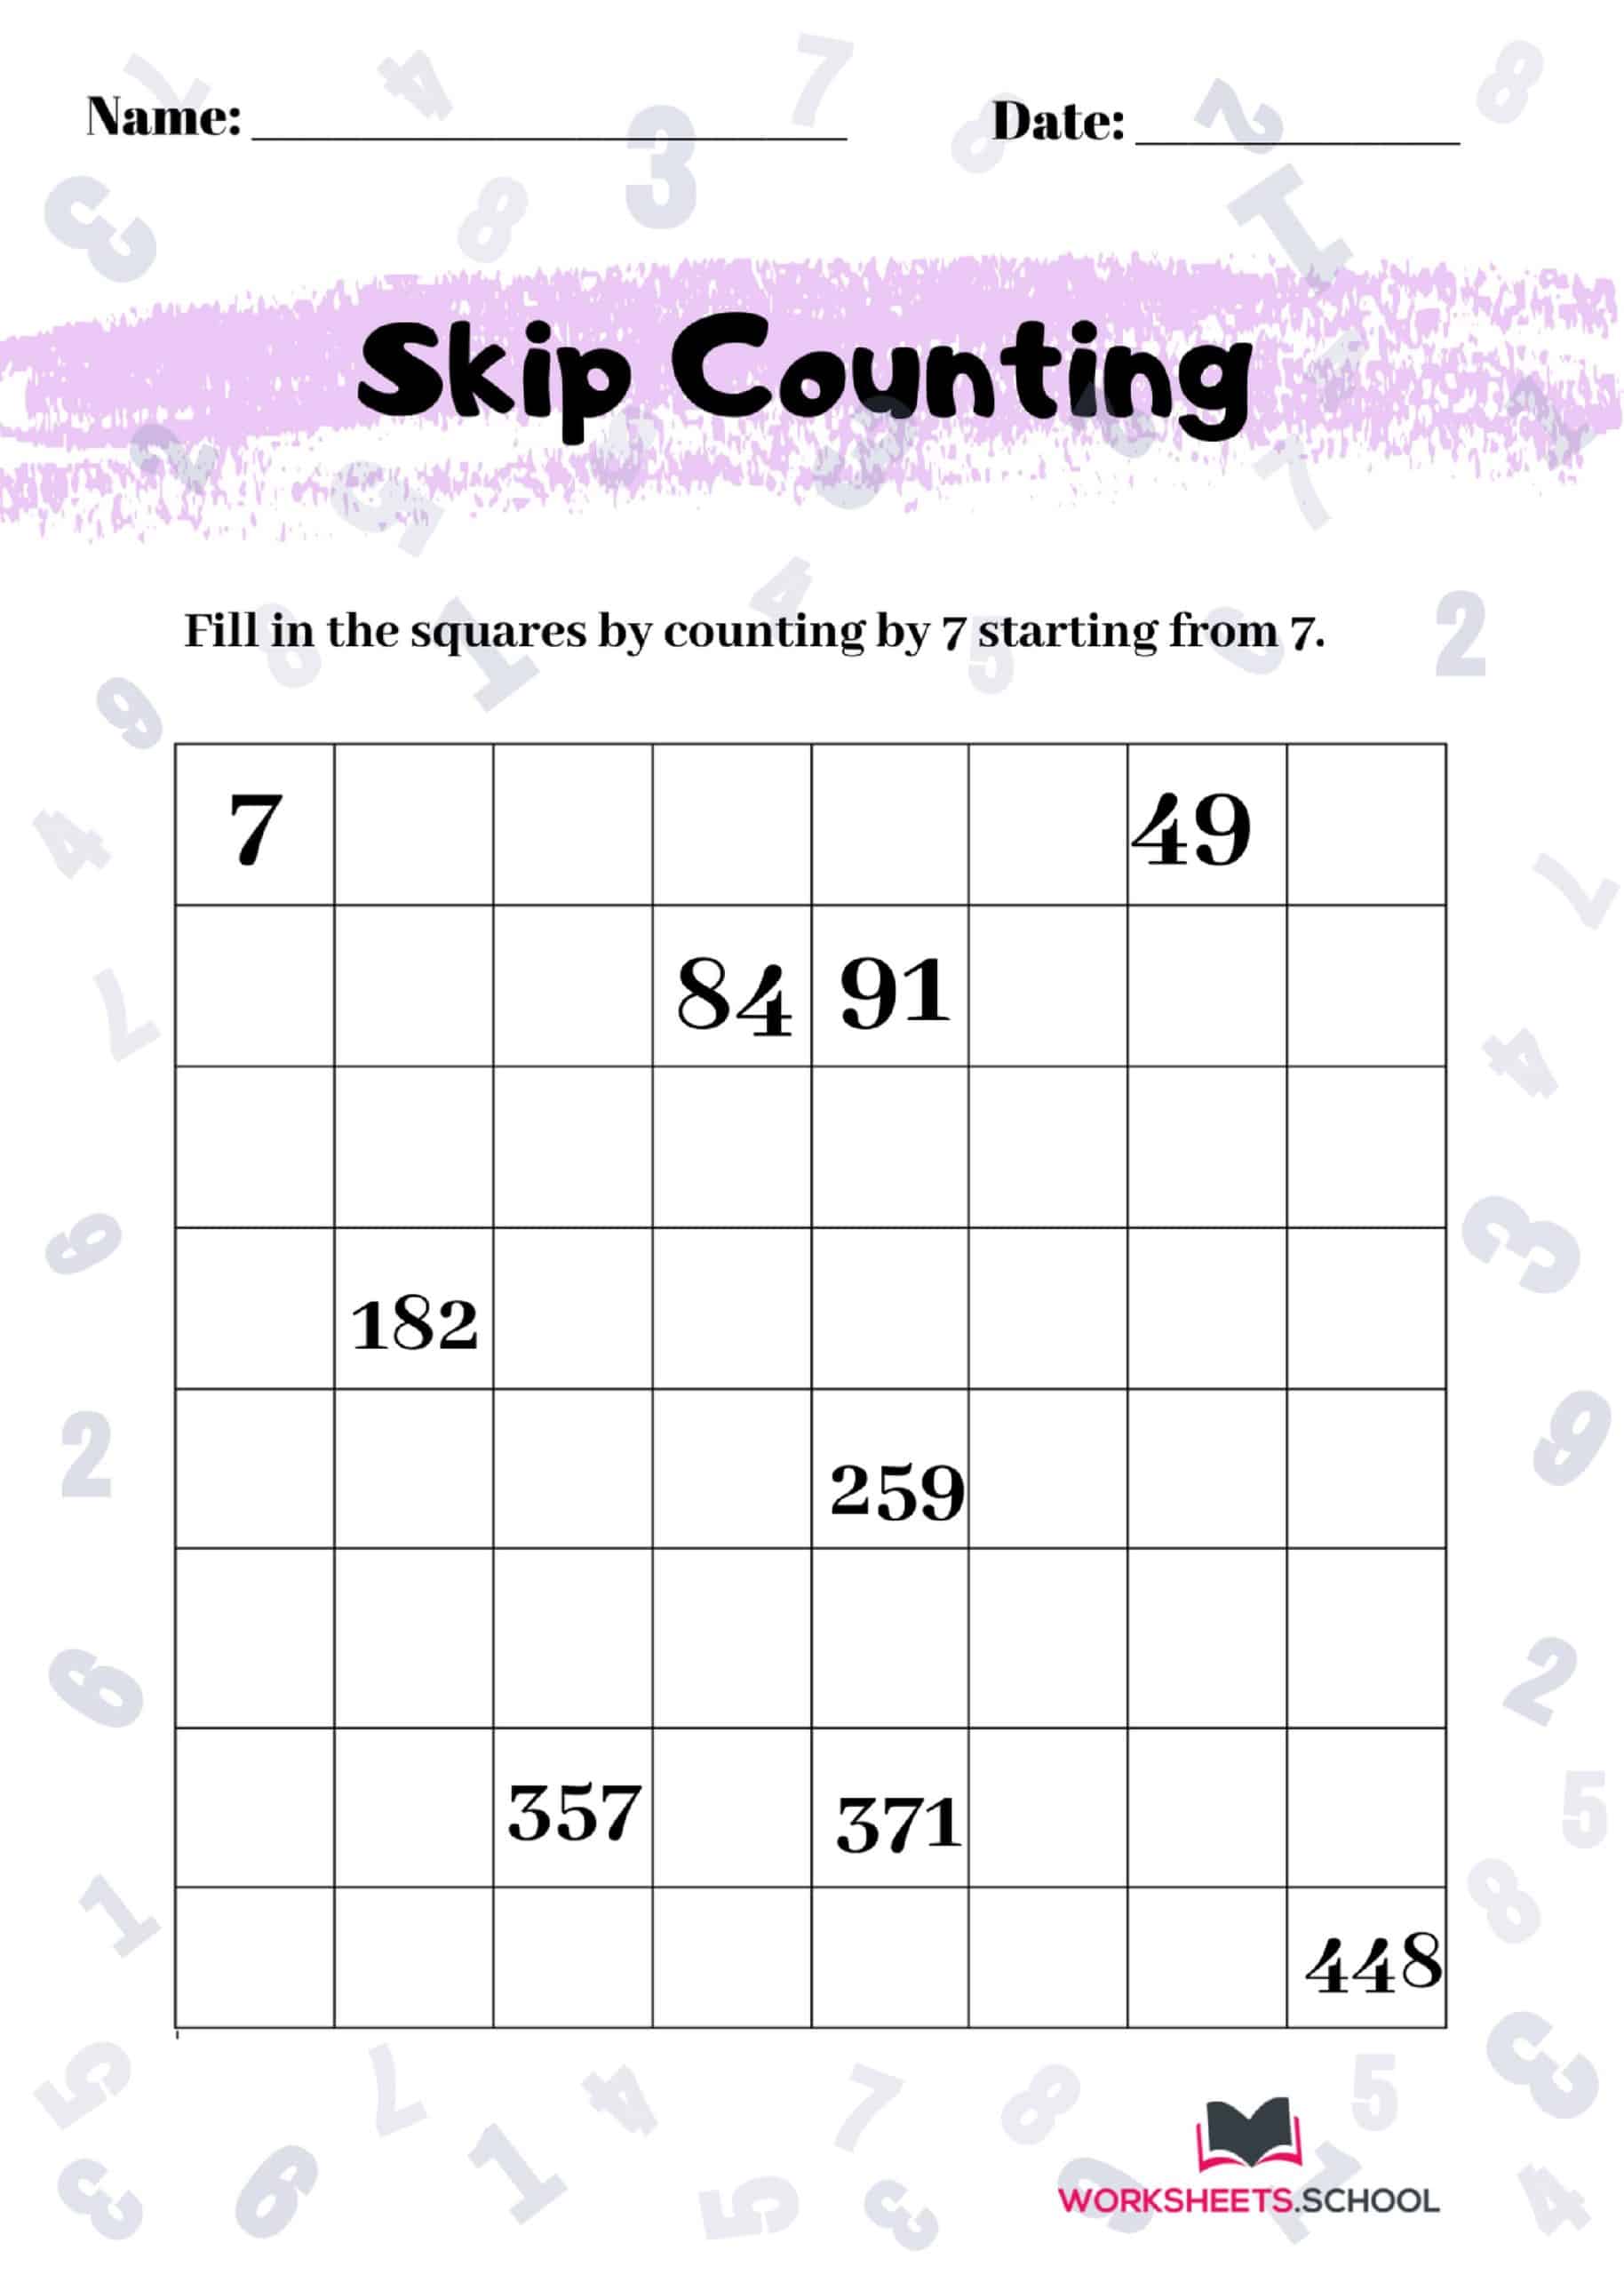 Skip Counting Worksheet by 7